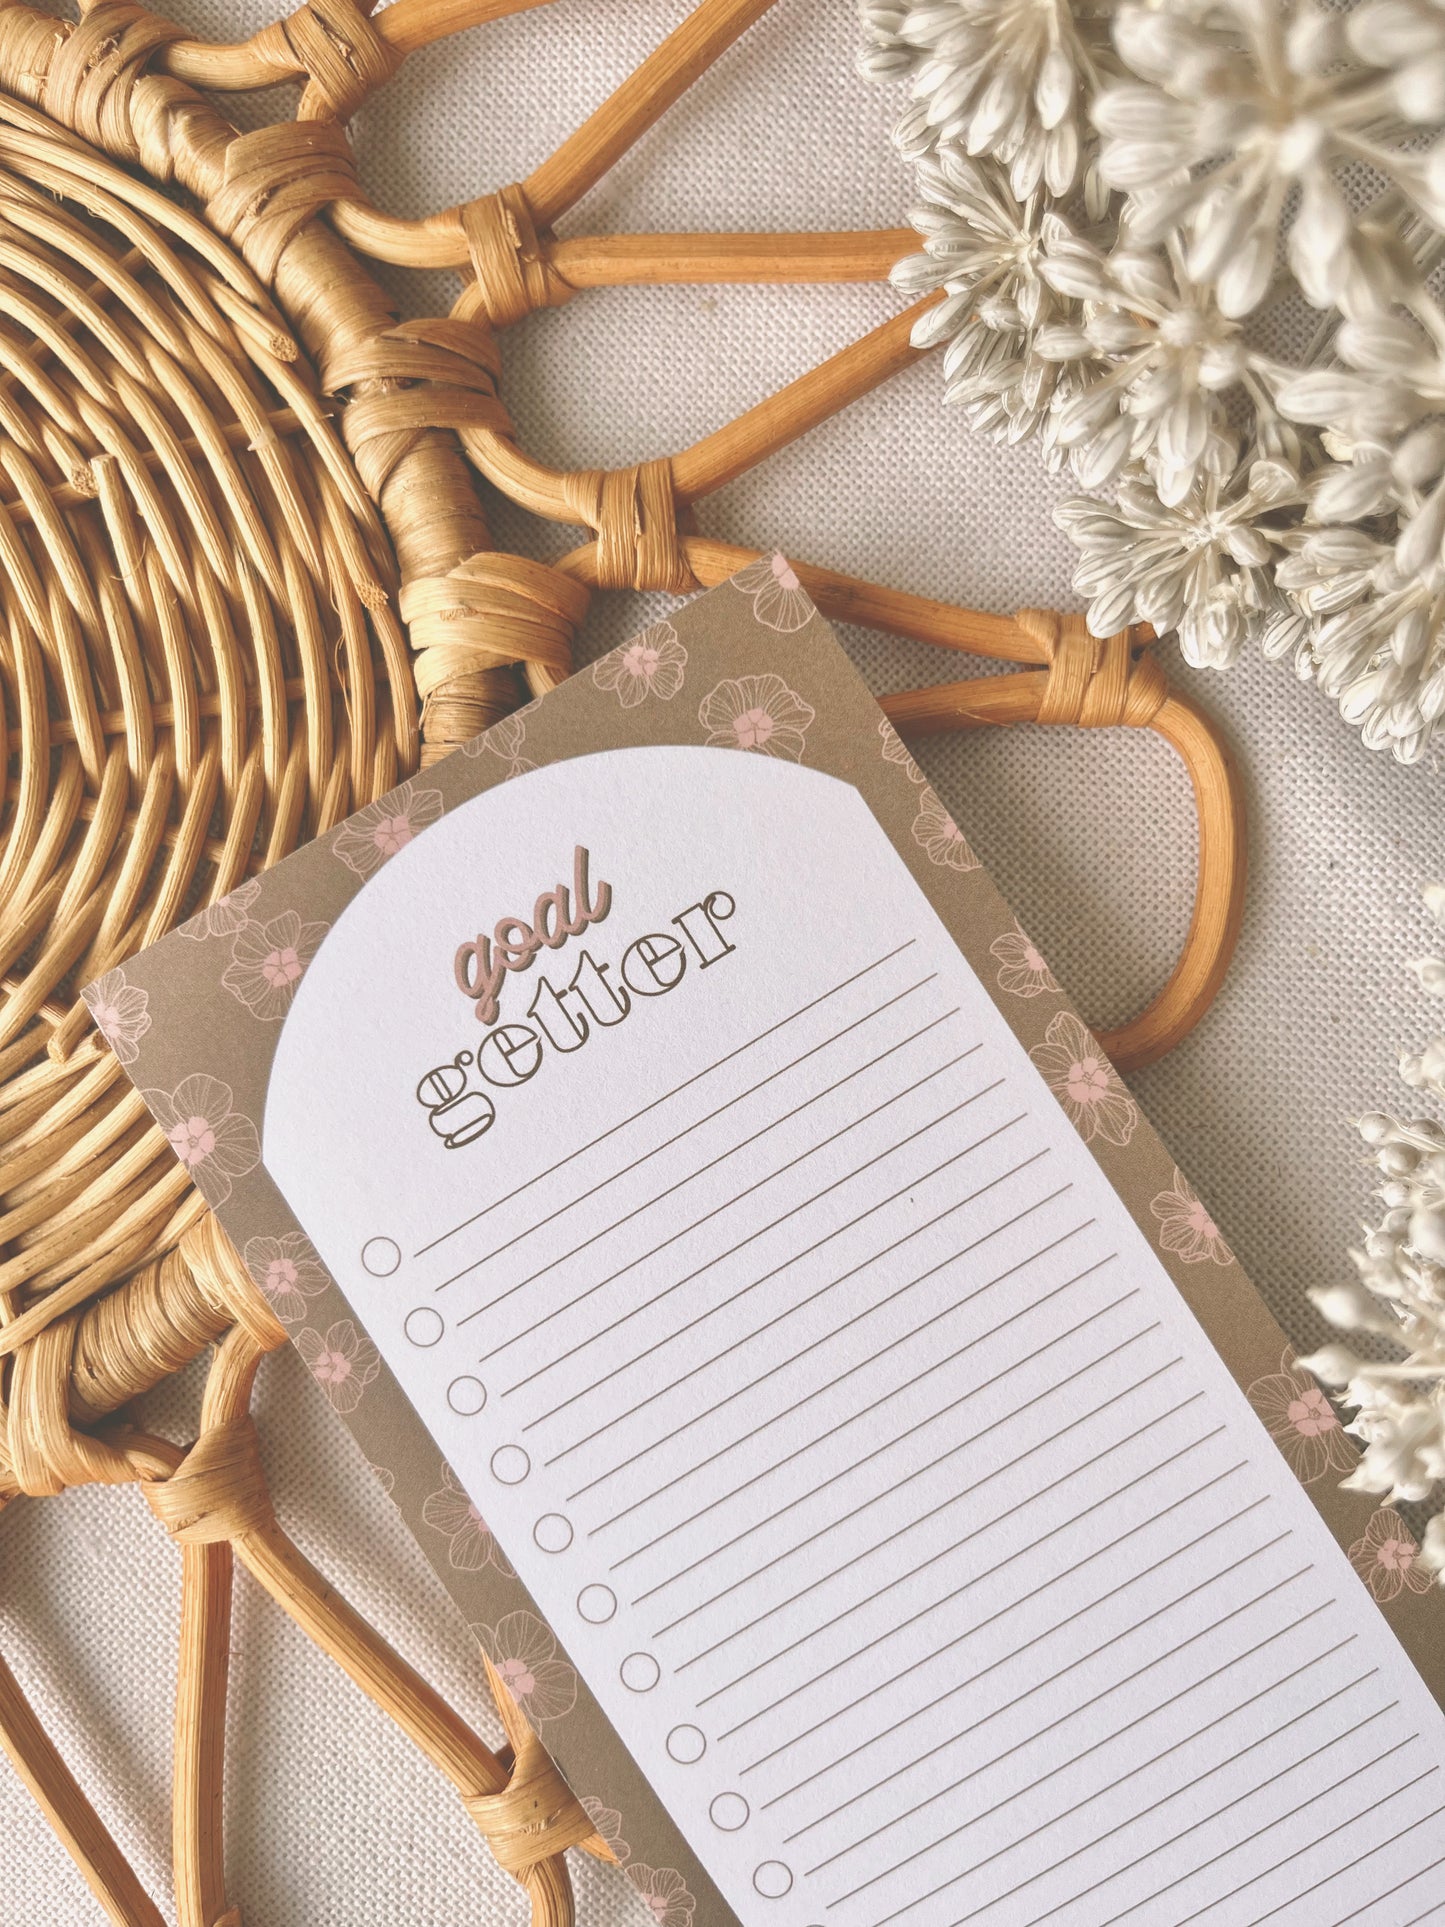 Goal Getter | To Do List Notepad